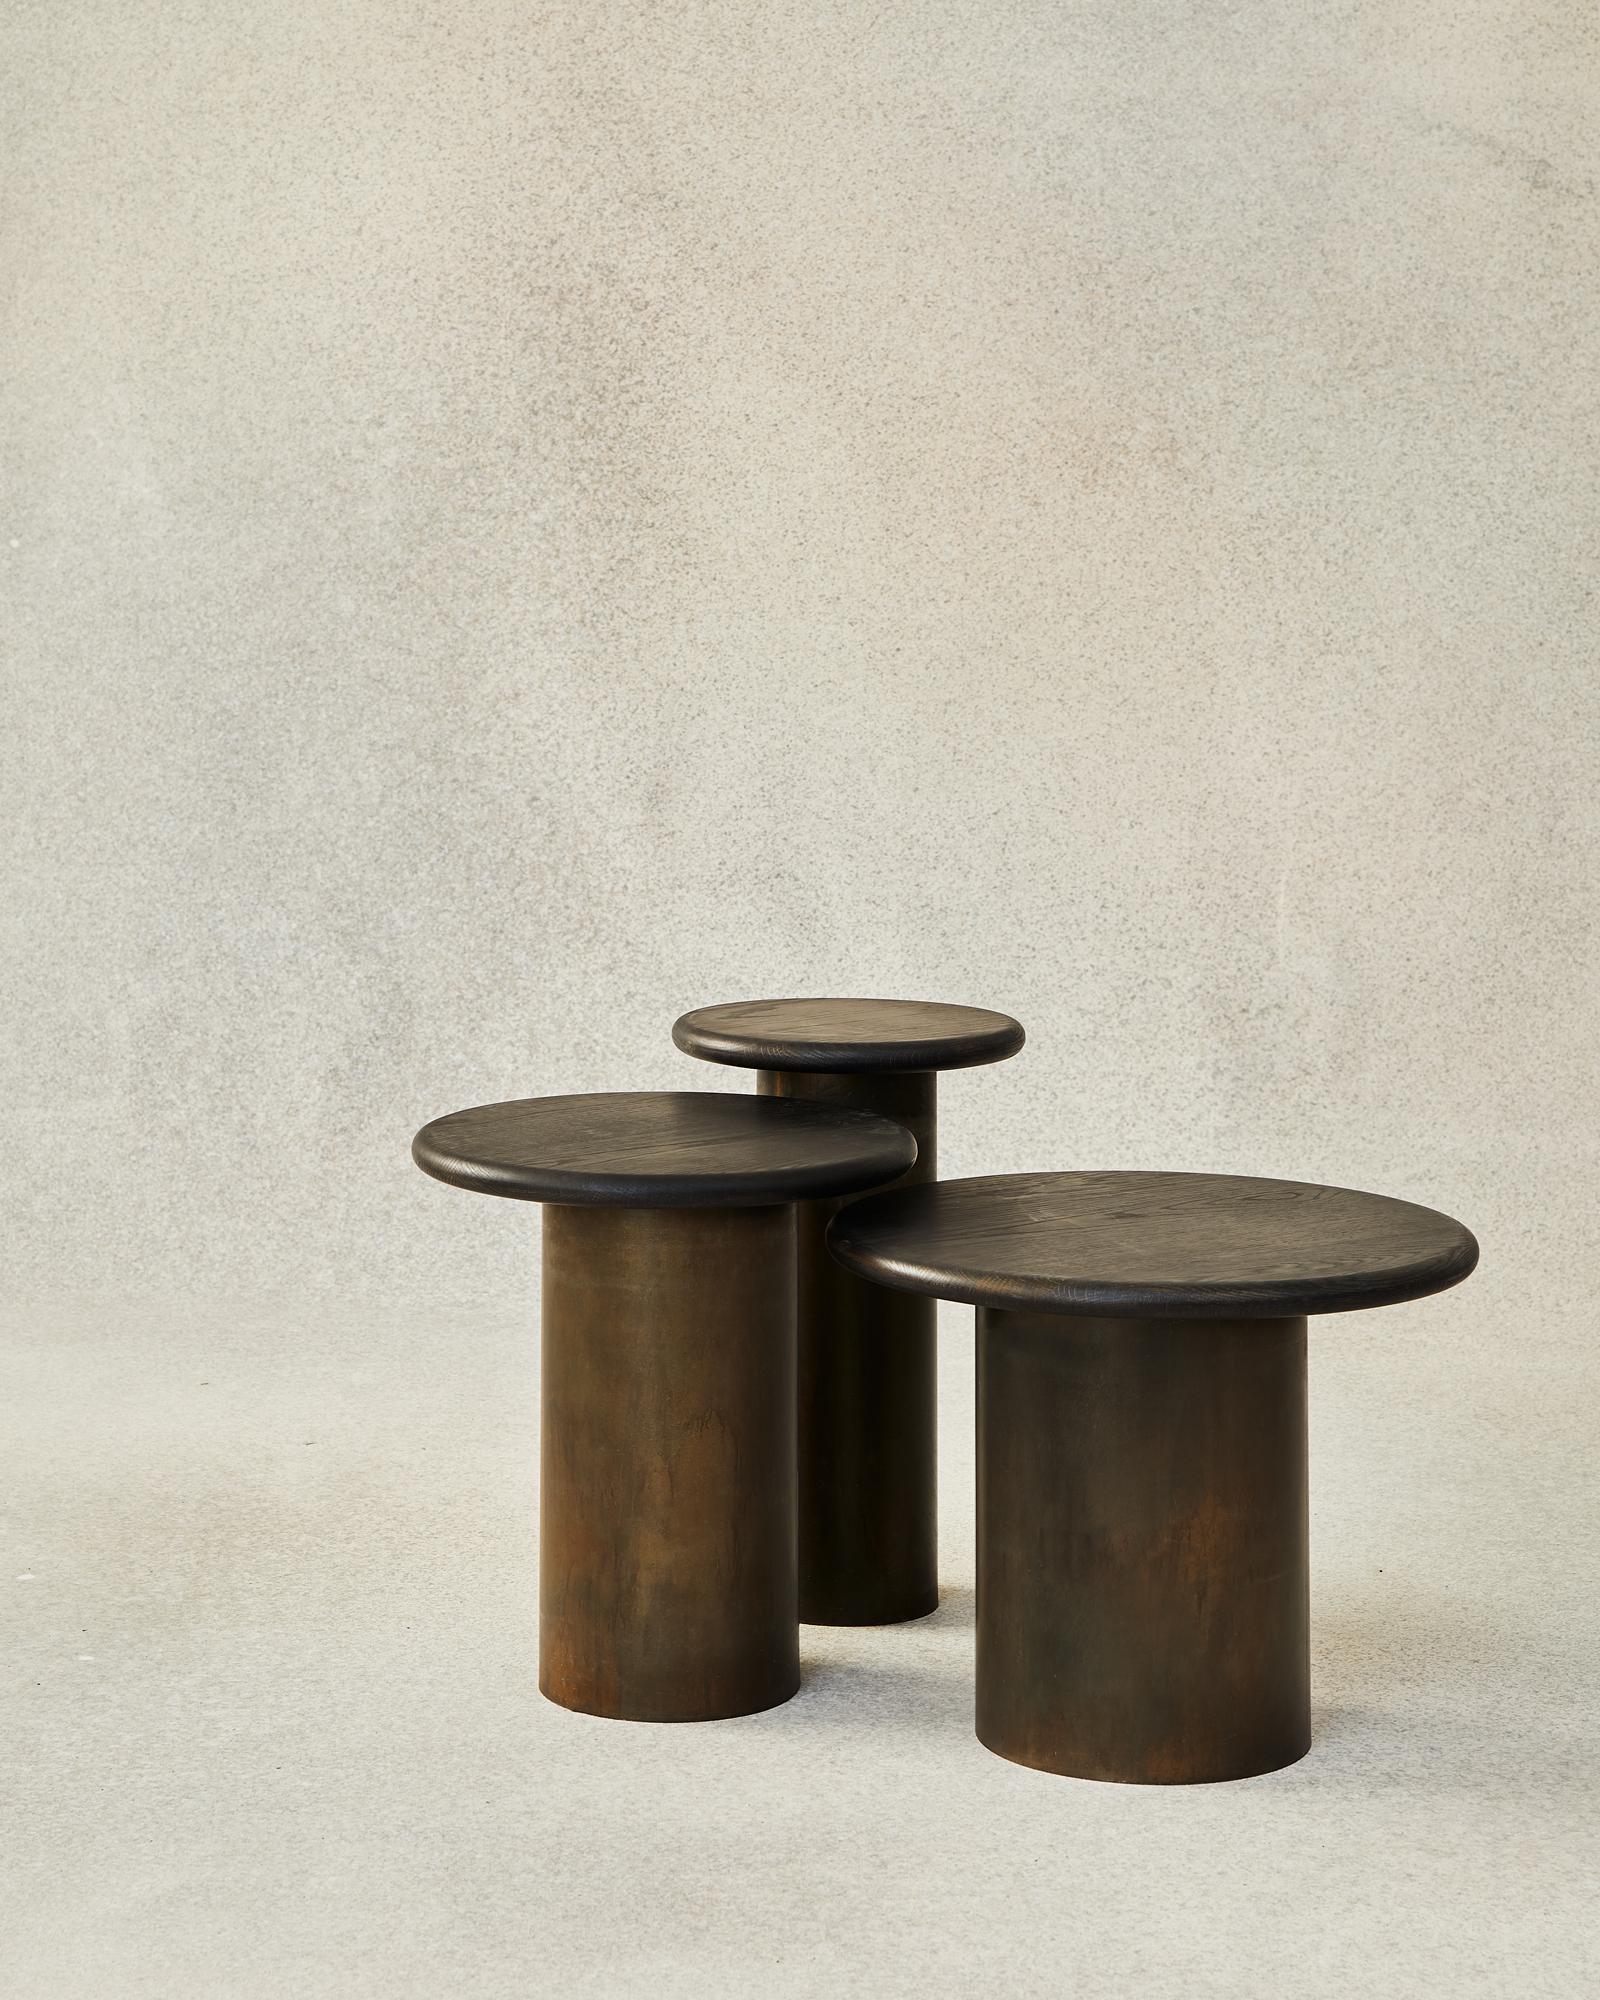 With their circular profiles, varying proportions and potential to be nested, these versatile tables evoke the pattern of raindrops in a pool of water when placed together.

Bought as a set of 300, 400, 500, we add a 10% discount.

Tops: black